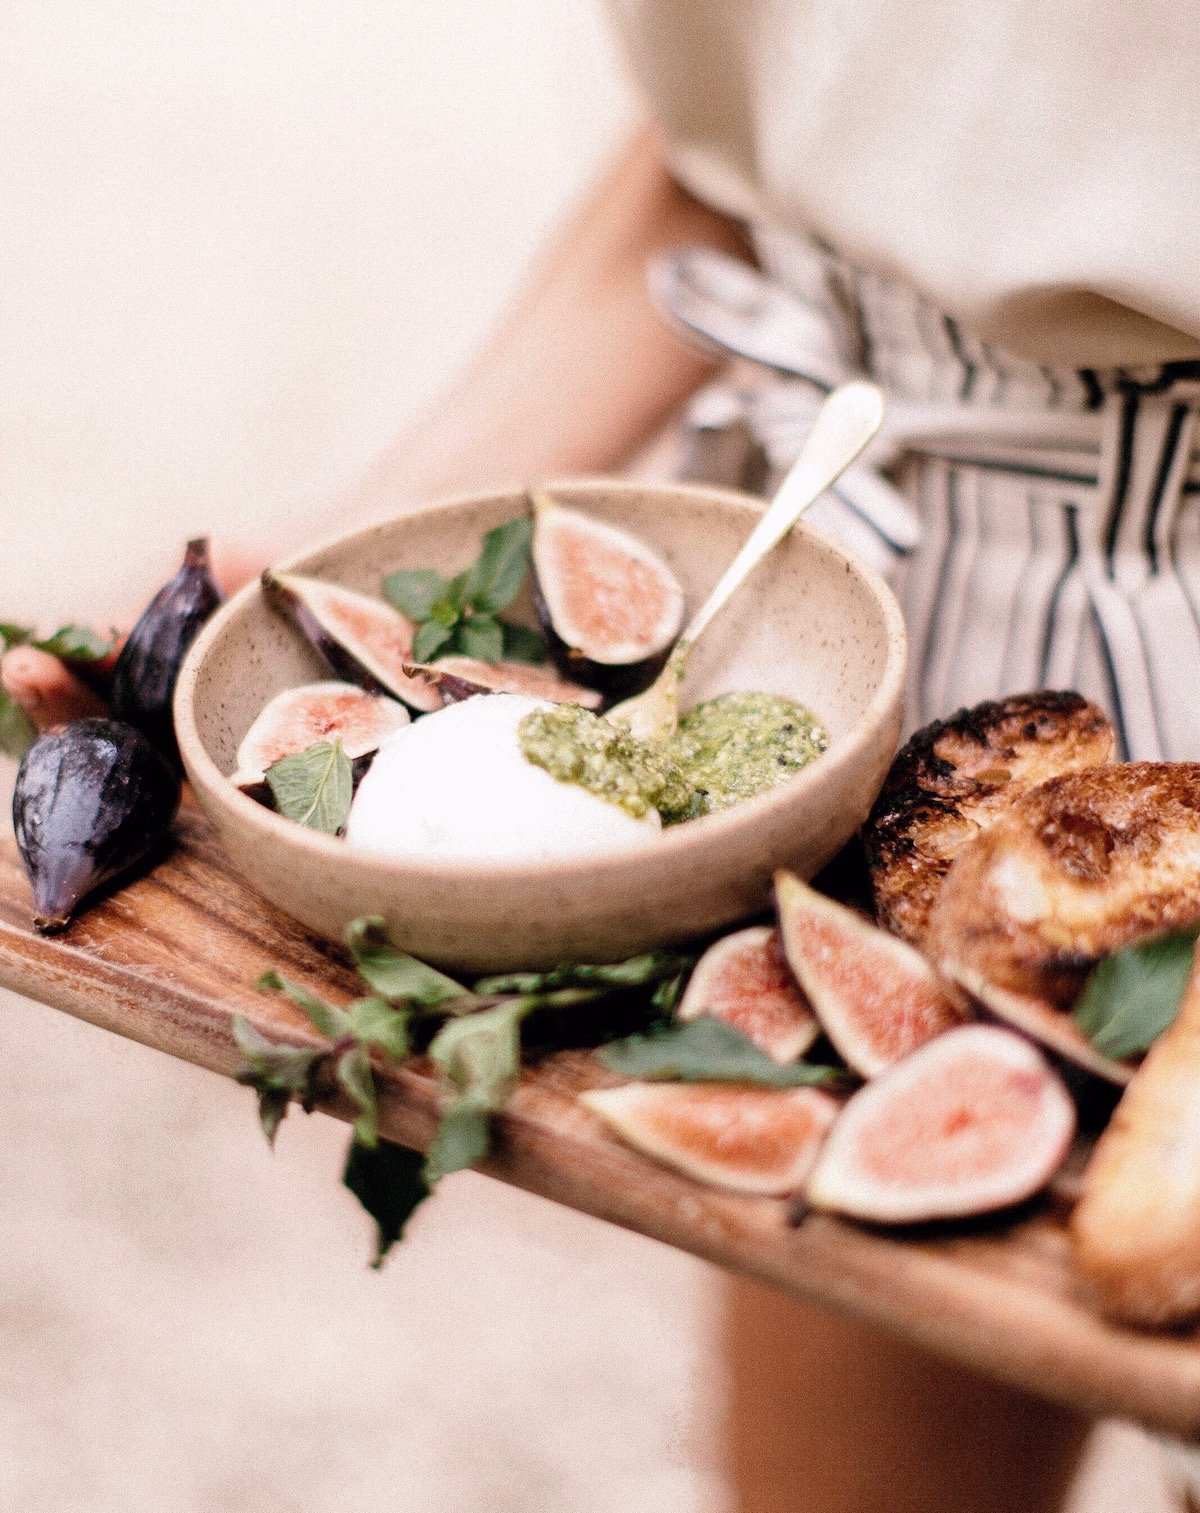 burrata with figs, pesto and grilled bread